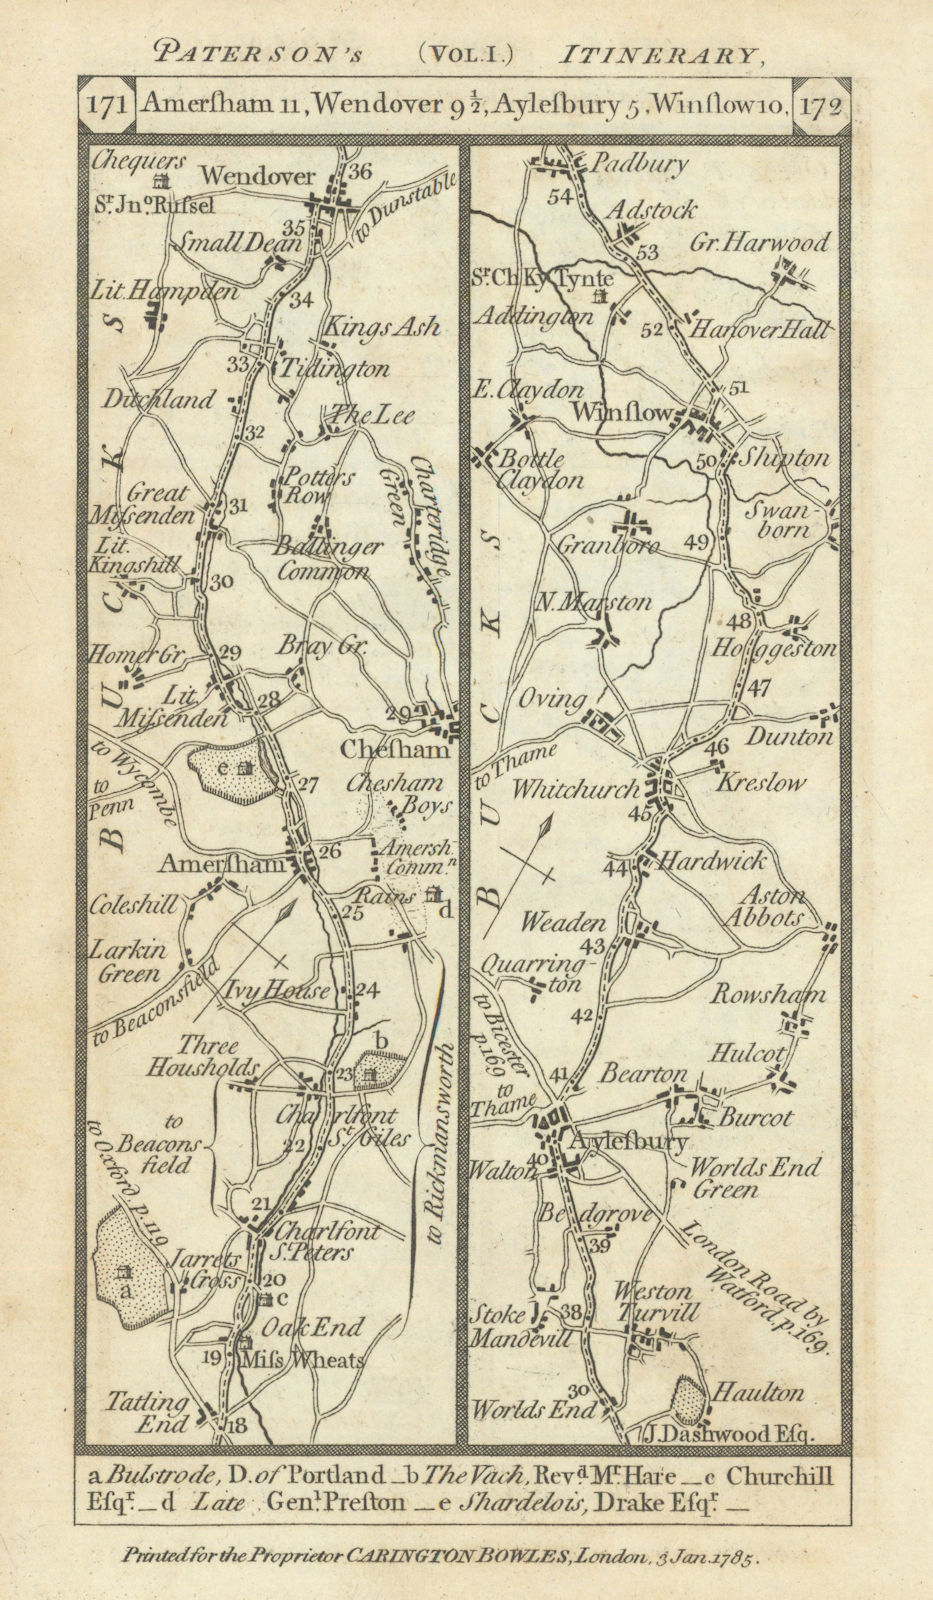 Chalfonts-Amersham-Wendover-Aylesbury-Winslow road strip map PATERSON 1785